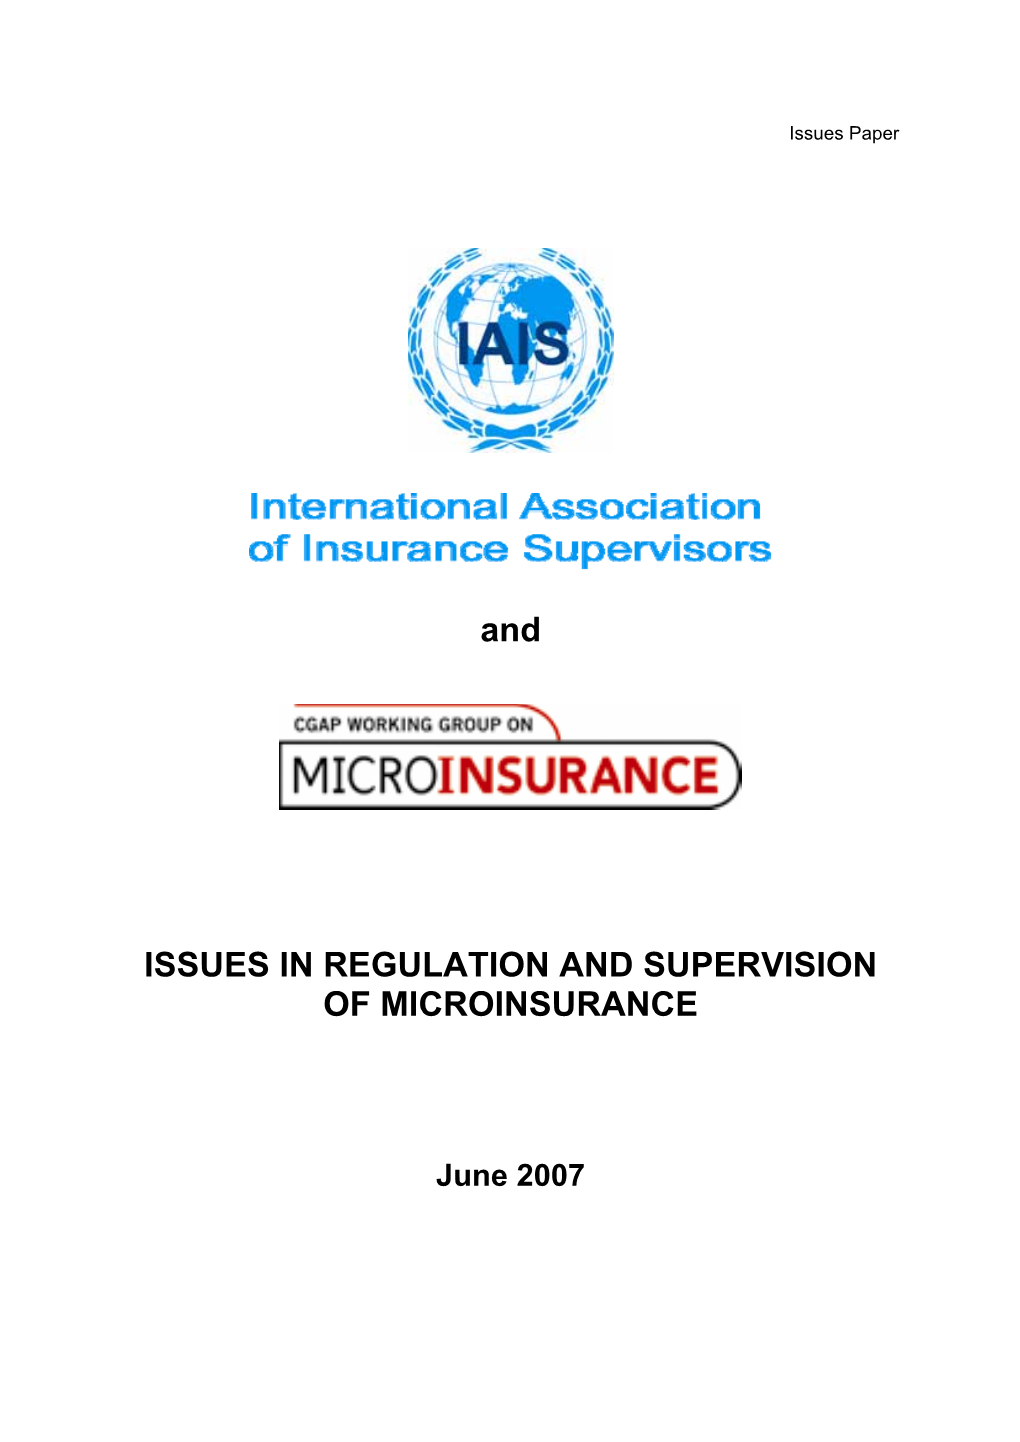 Issues in the Regulation and Supervision of Microinsurance